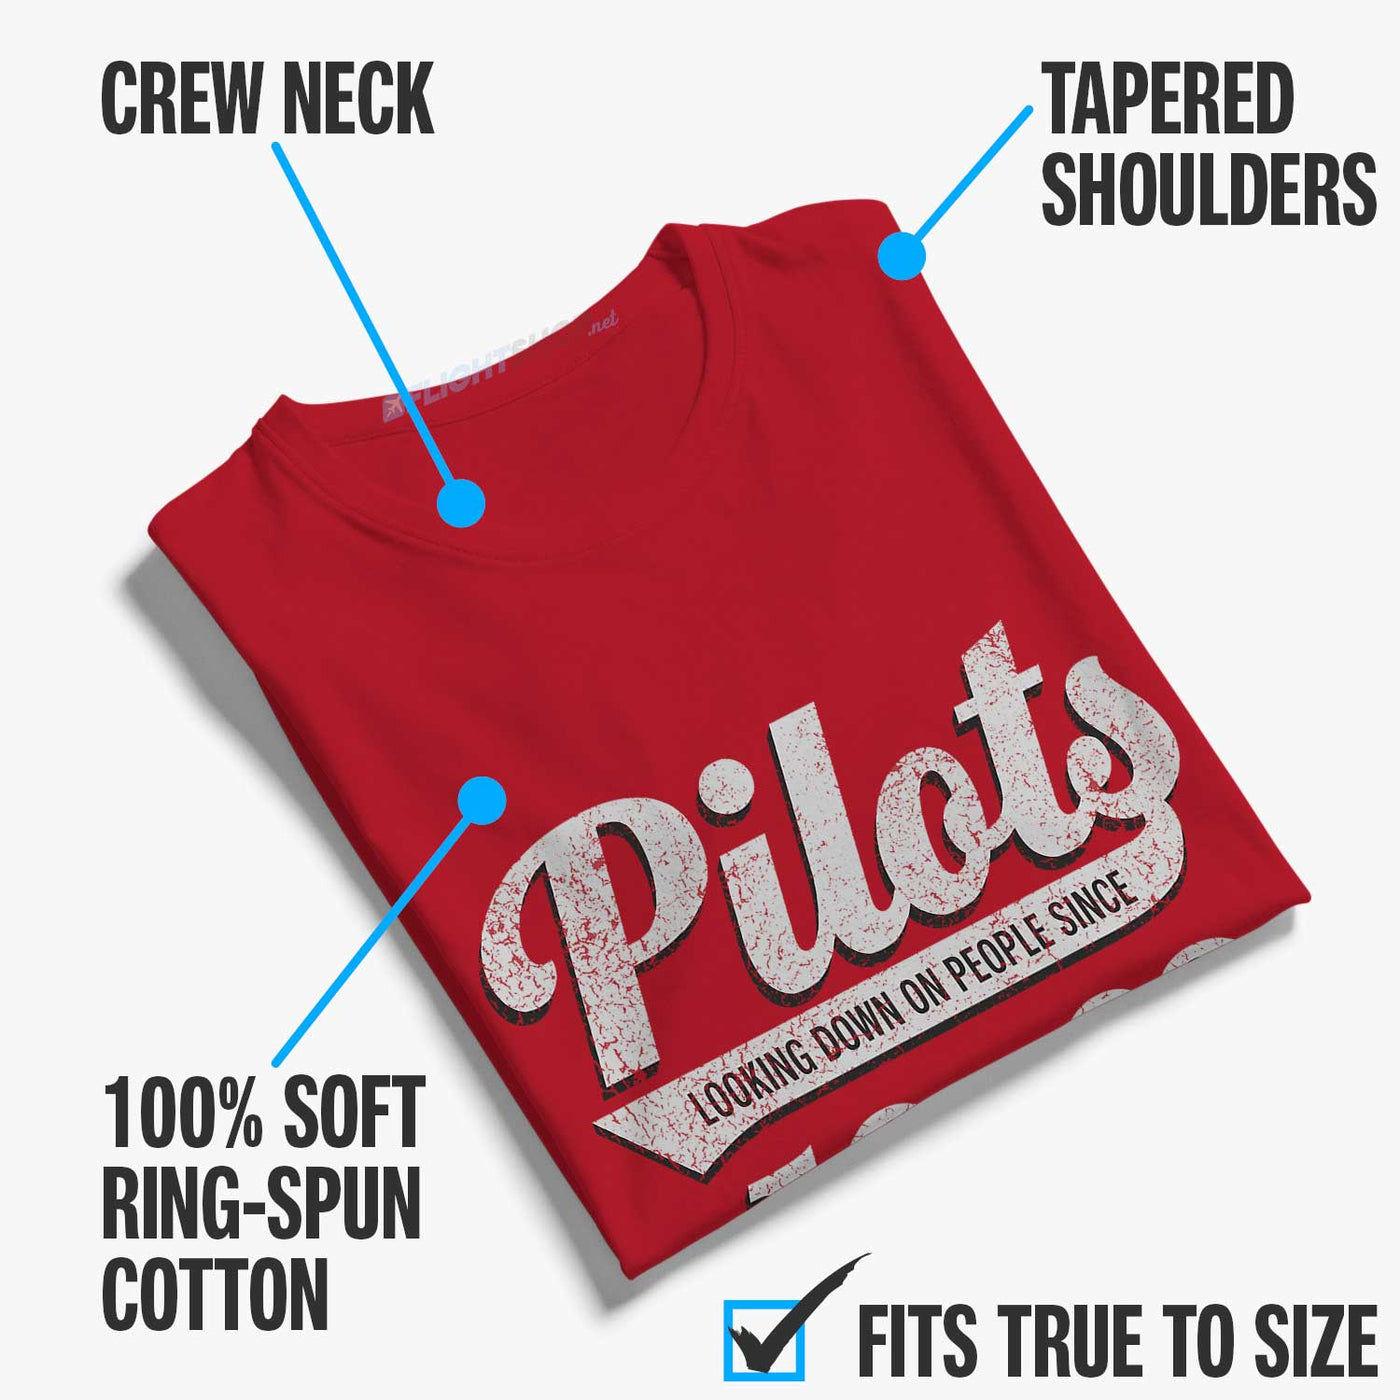 Pilots-Looking-Down-On-People-T-Shirt-Details